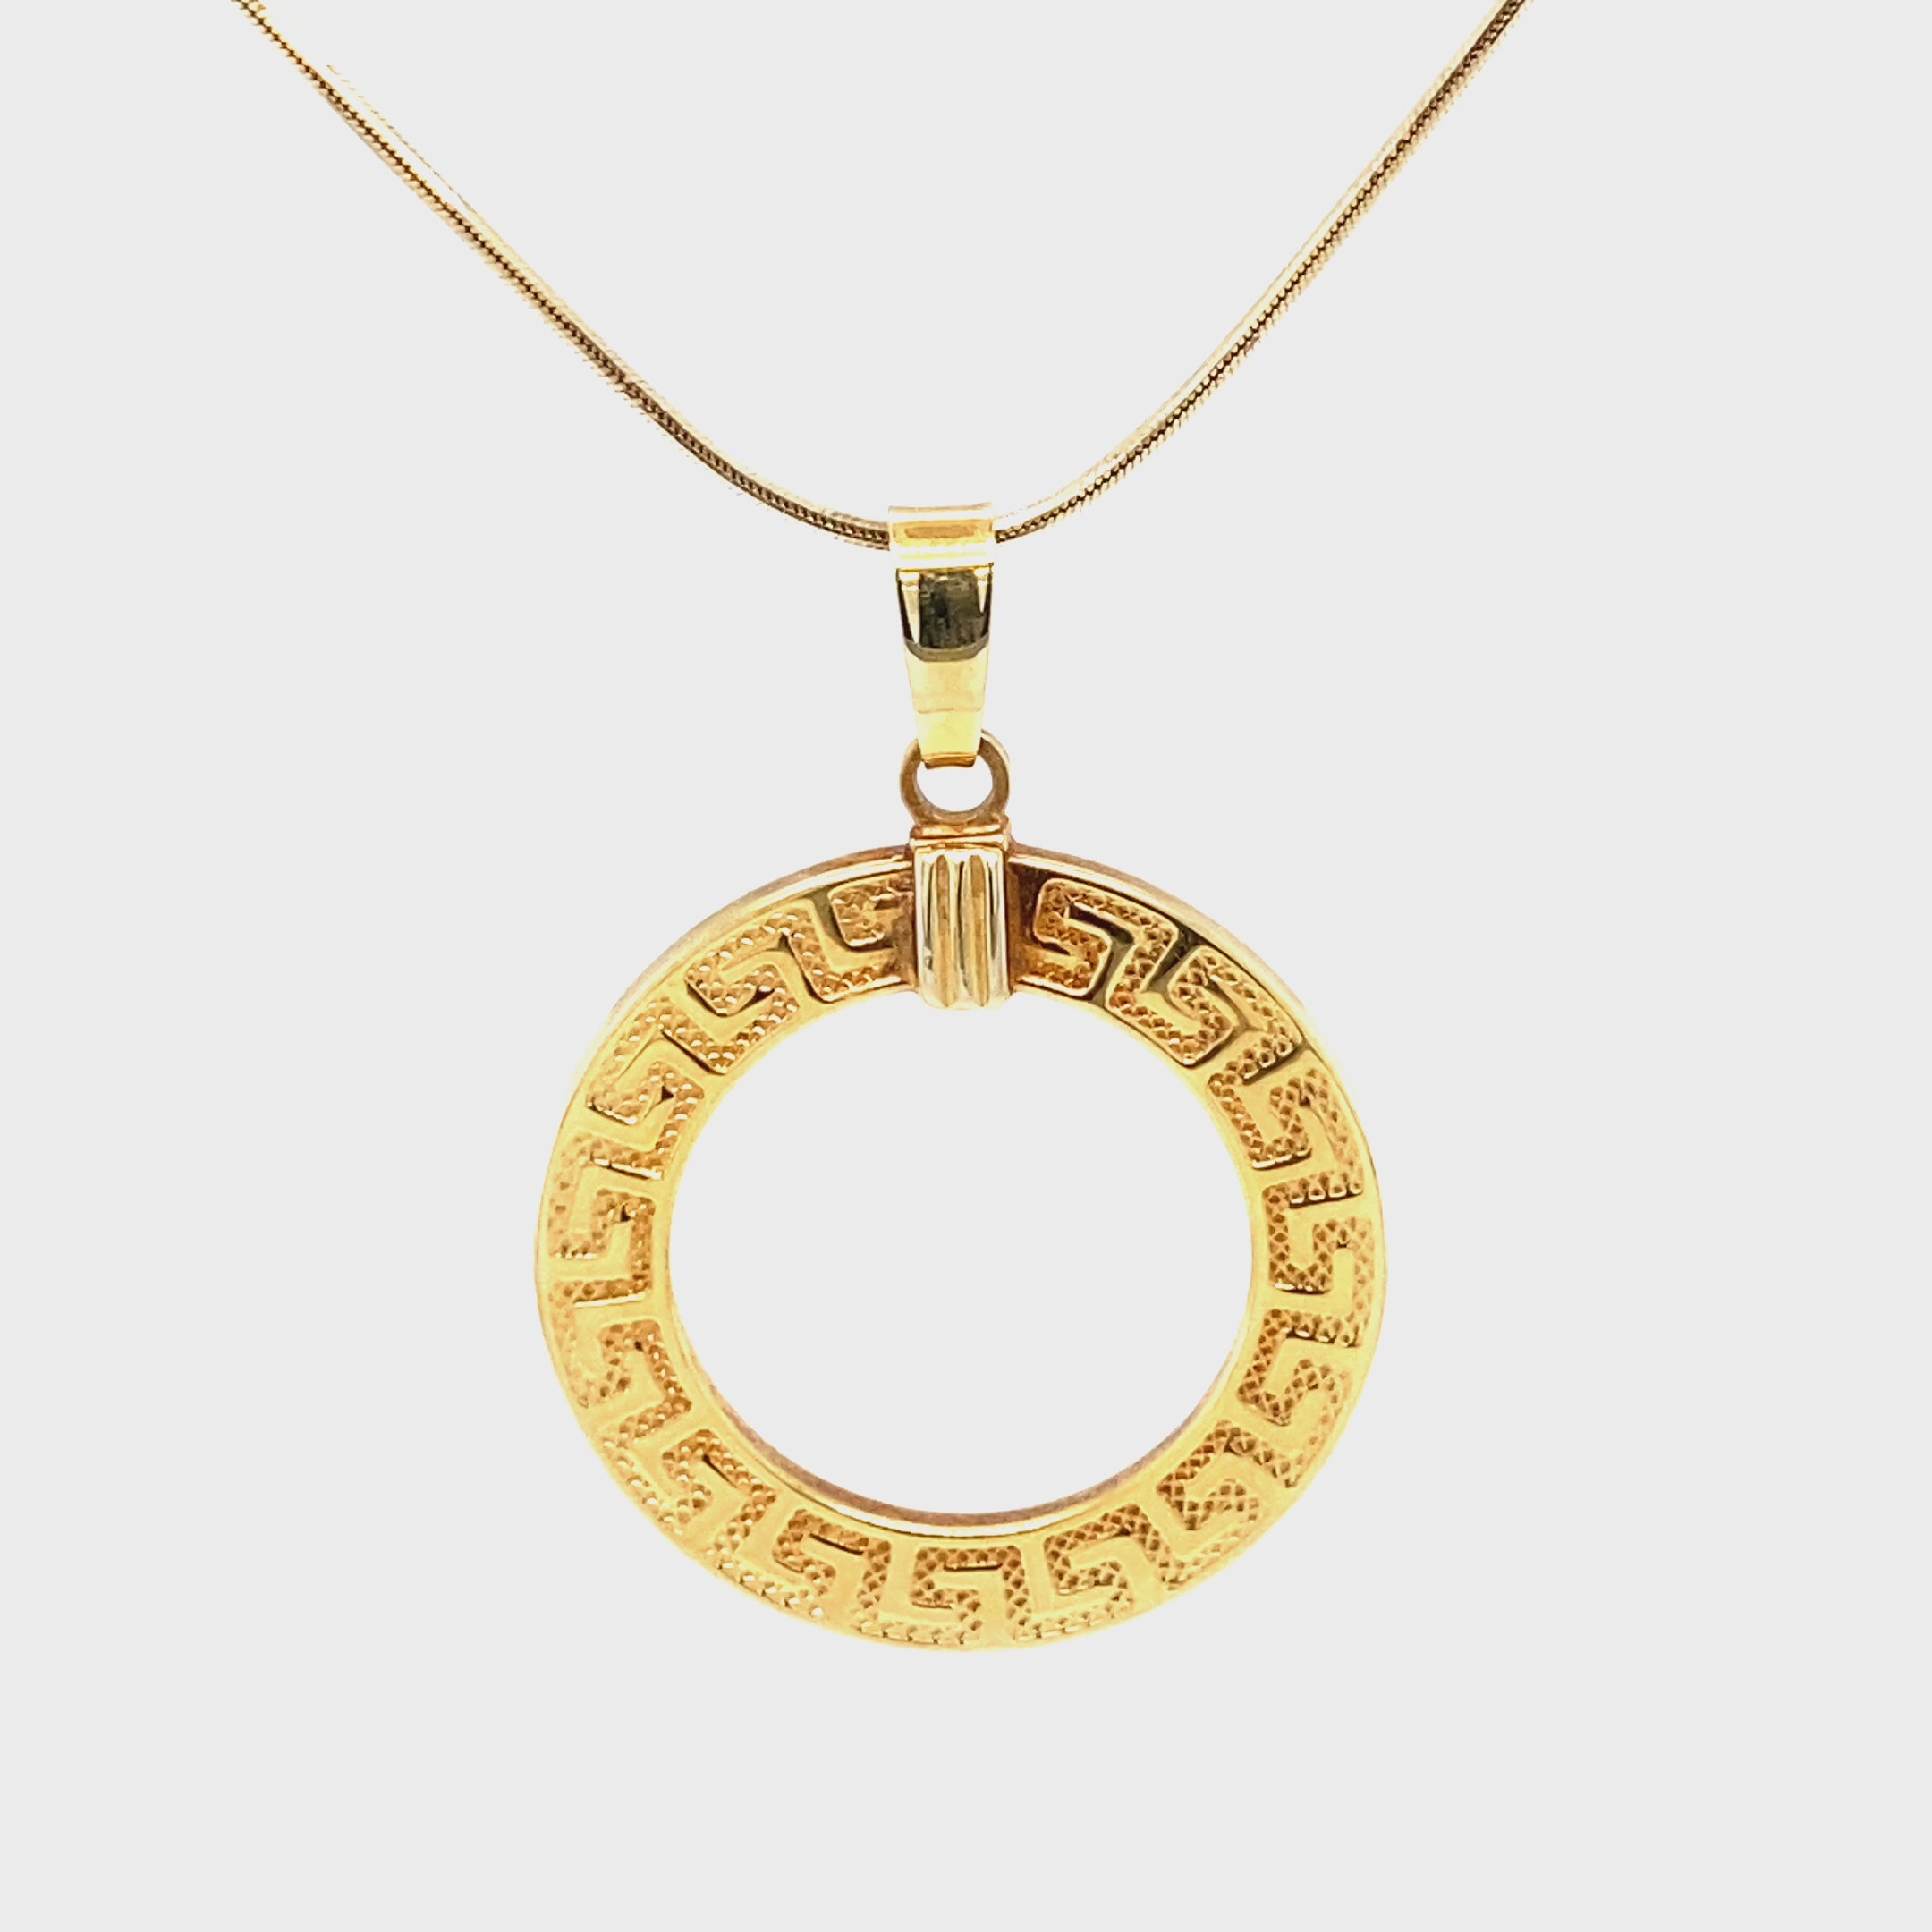 14K Solid Gold Pendant Necklace Circle Pendant No Stone Necklace Statement Jewellery Vintage Estate Jewelry Yellow Gold Pattern Snake Chain